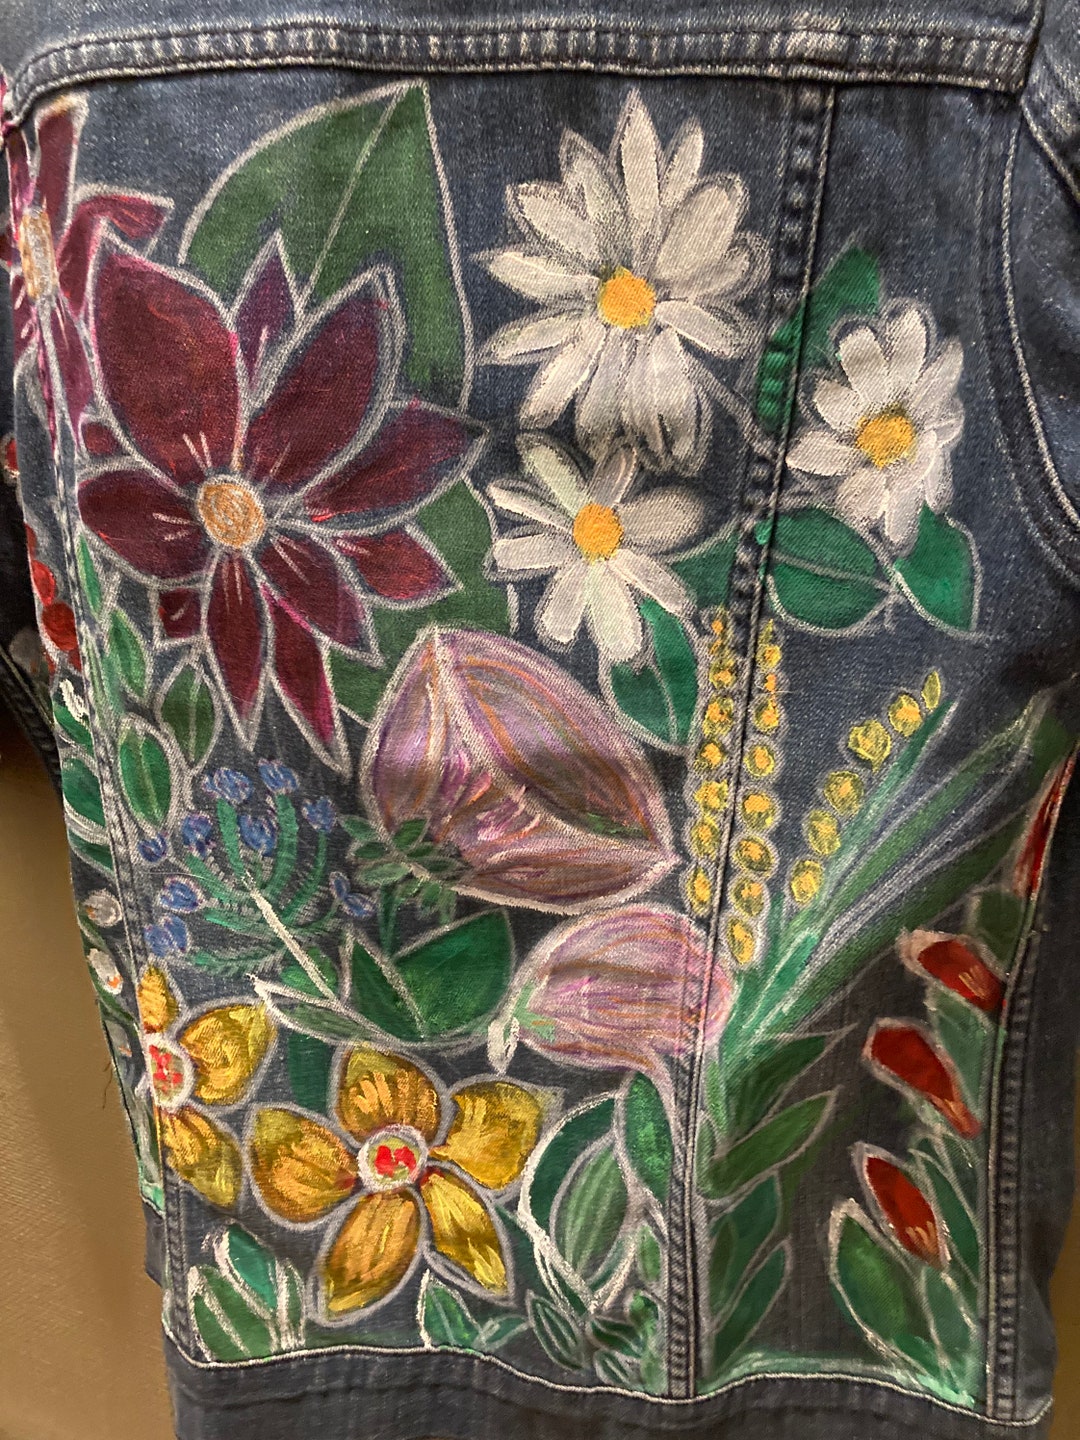 Hand Painted Floral Jean Jacket - Etsy